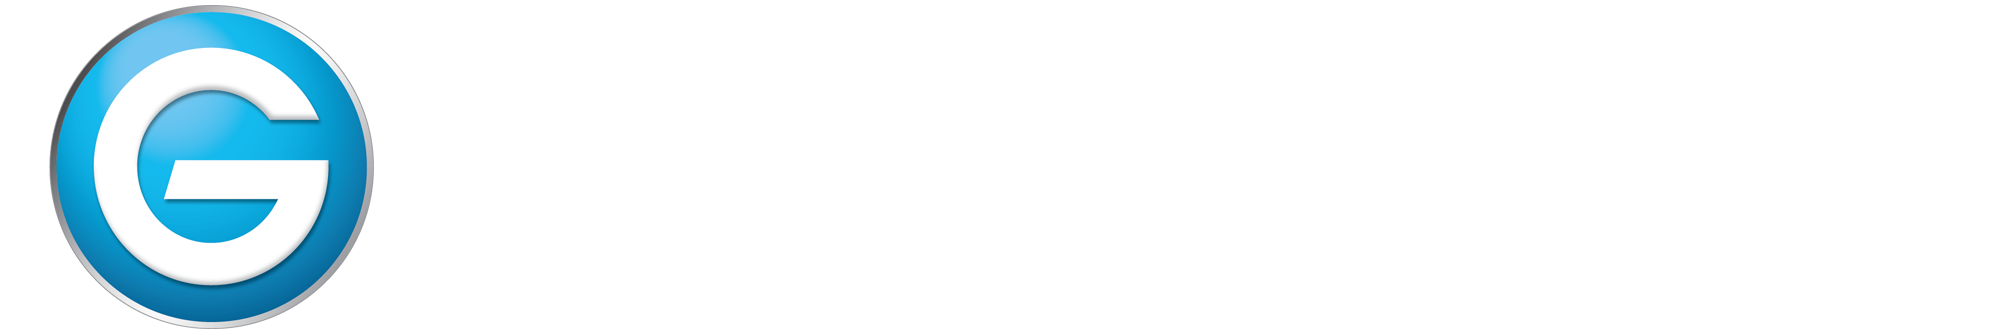 g-technology_for web.png